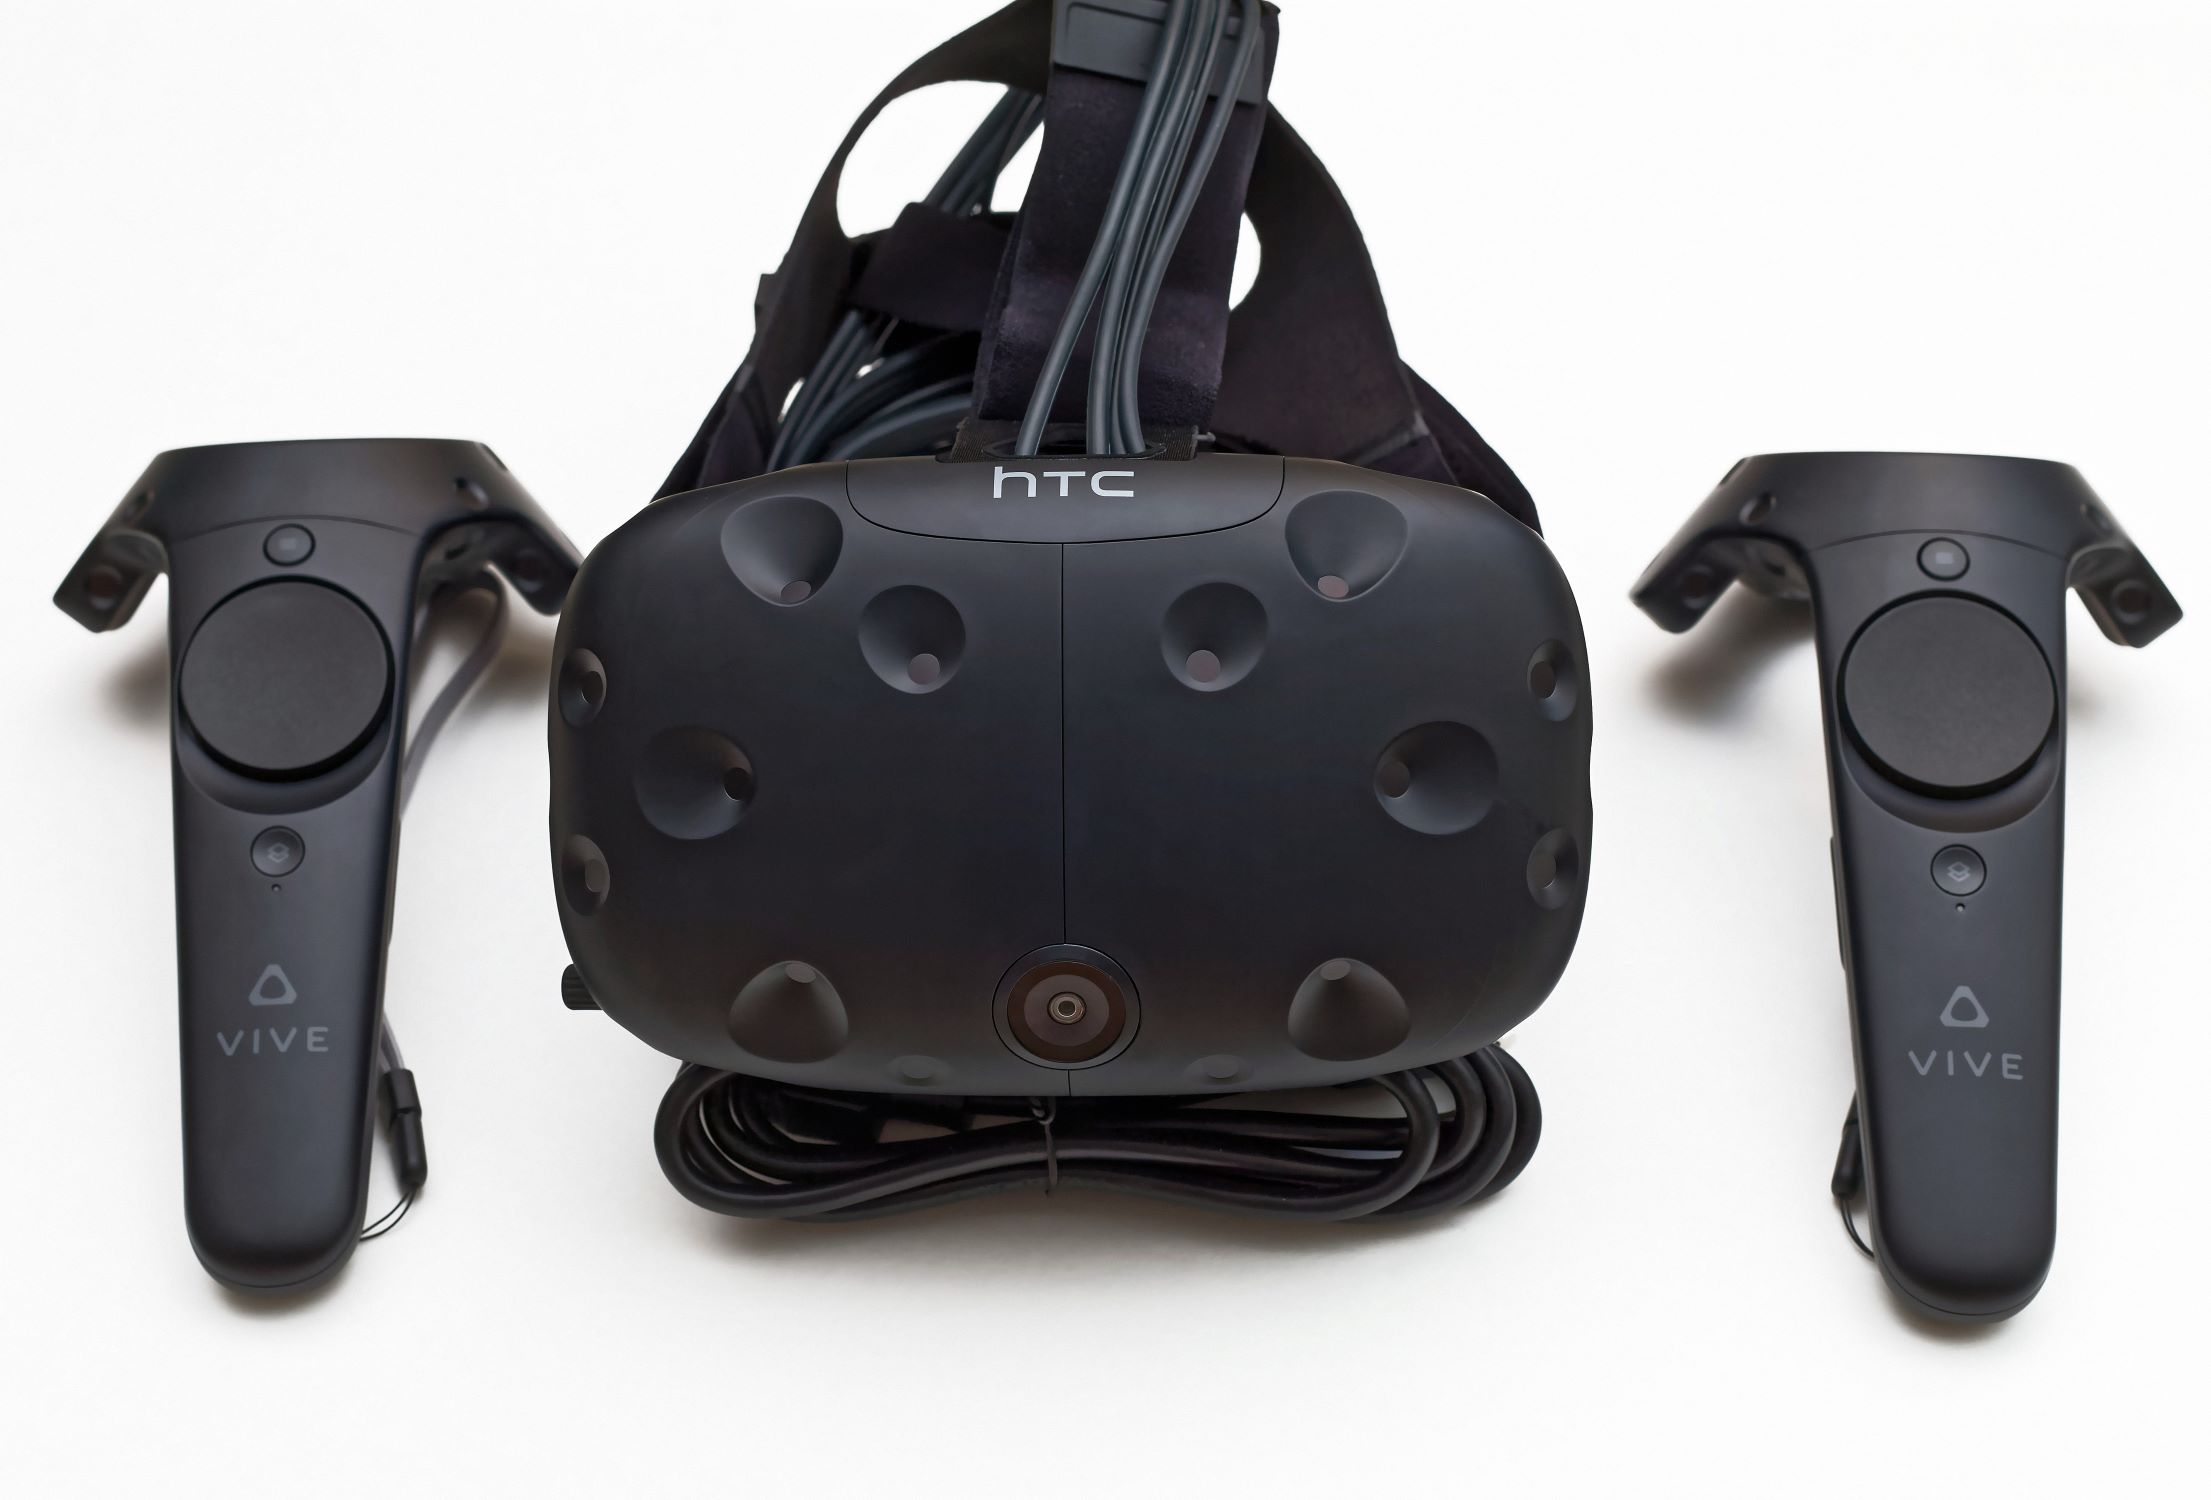 What Comes With An HTC Vive